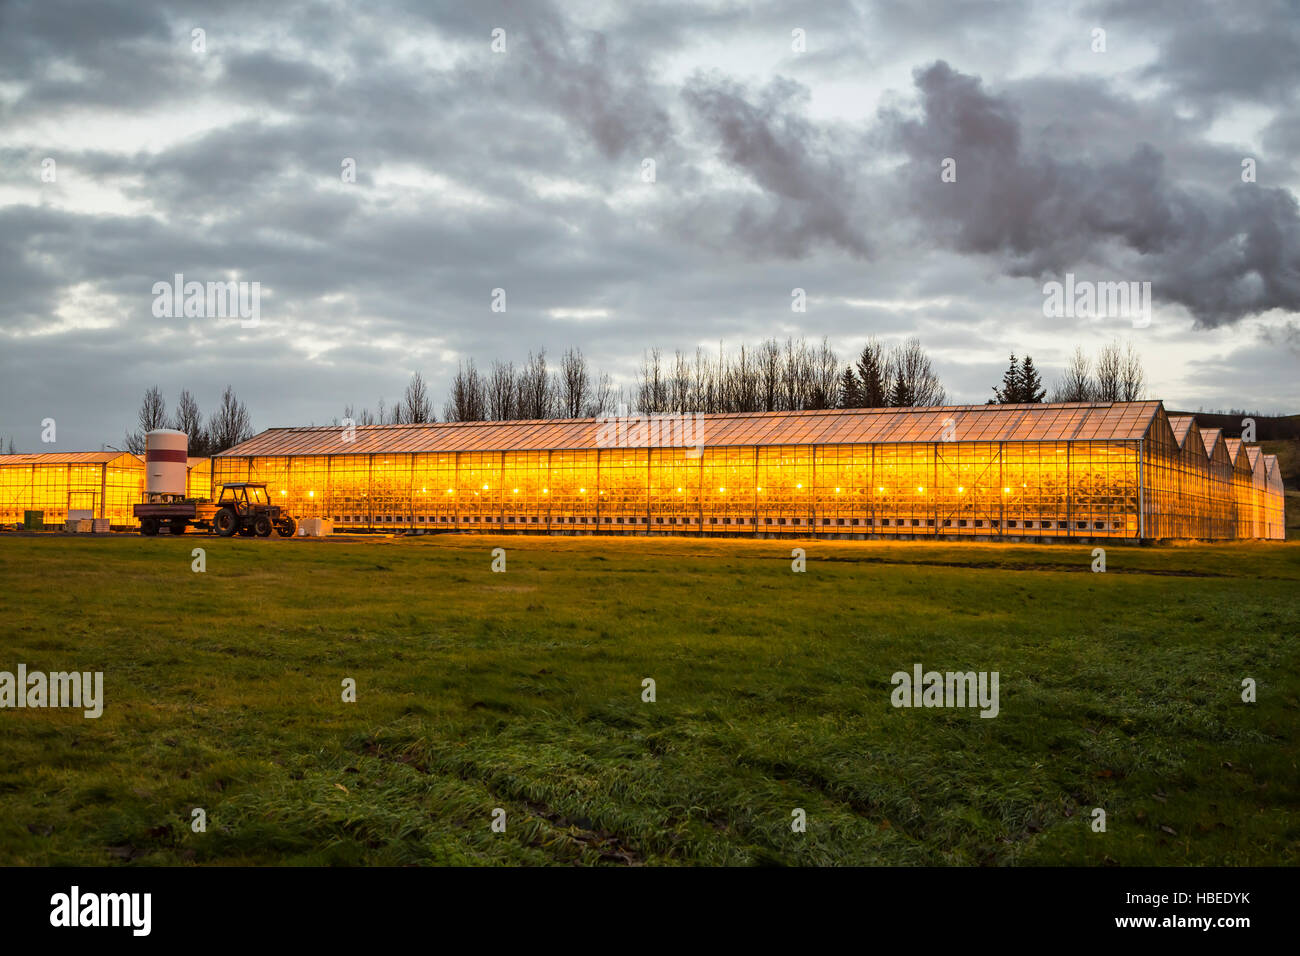 The orange glow of high pressure sodium lamps at the Fridhiemer greenhouses in southwestern Iceland, Europe. Stock Photo